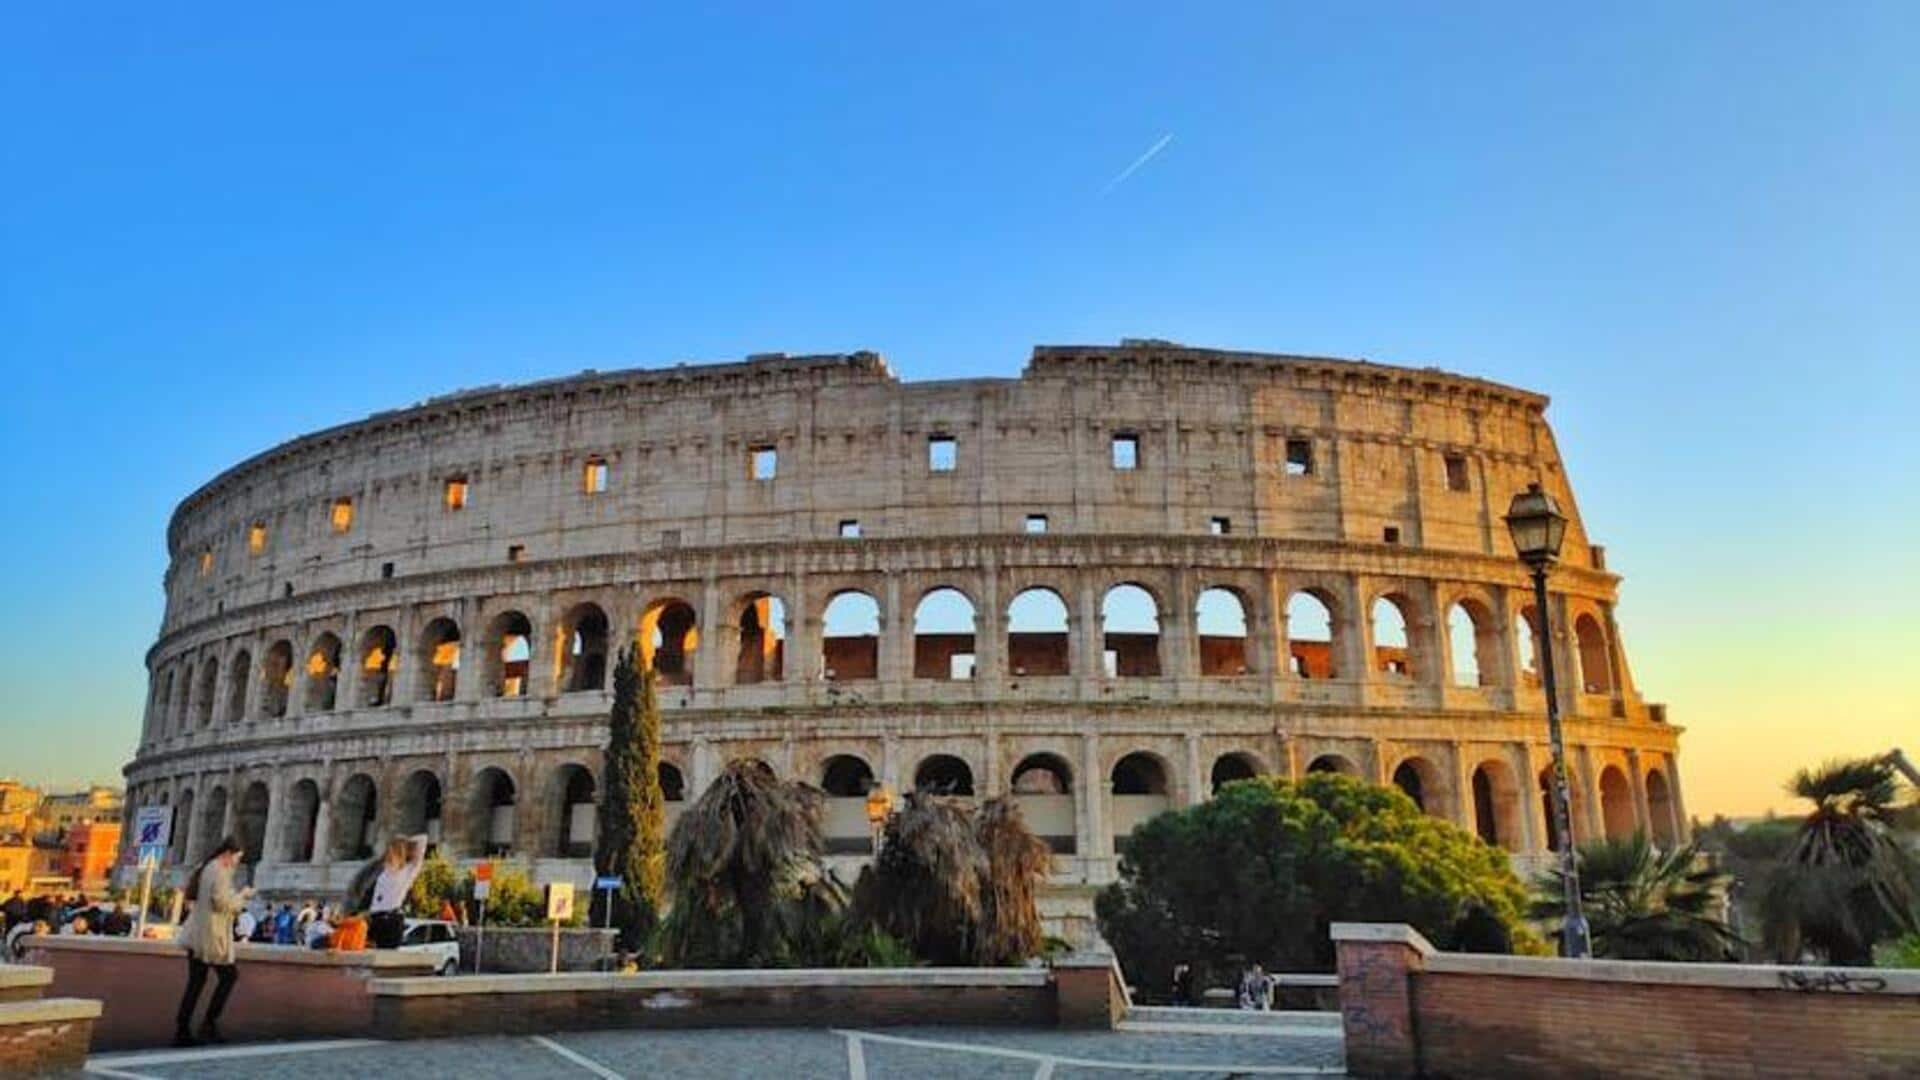 Rome's ancient ruins look spectacular during sunset. Visit them